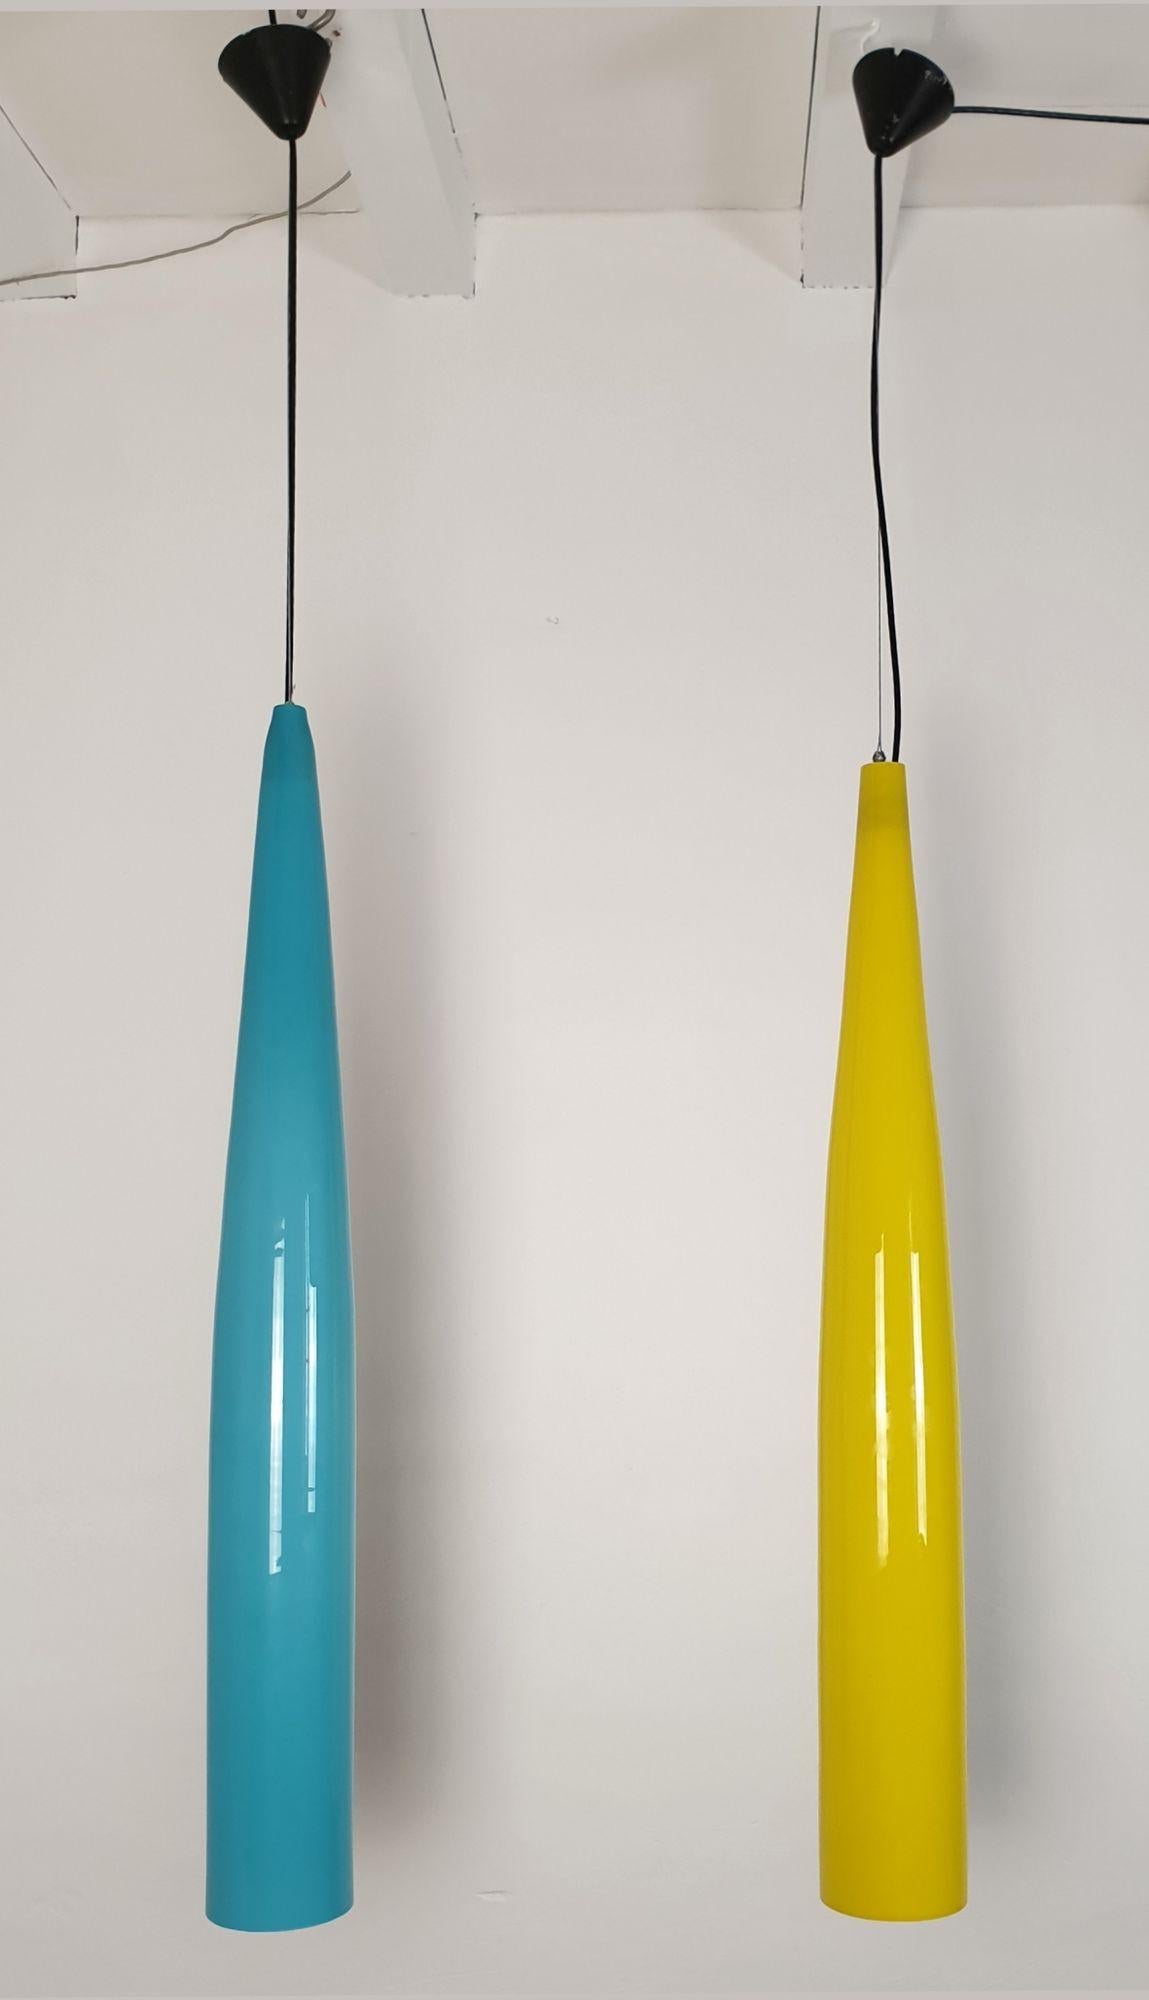 Very long Mid-Century Modern Murano glass pendant lights, by Alessandro Pianon for Vistosi, Italy 1960s.
The pair is made of a sky blue and a yellow Murano glass pendants.
The double layered glass (white on the inside the blue one) (yellow in the